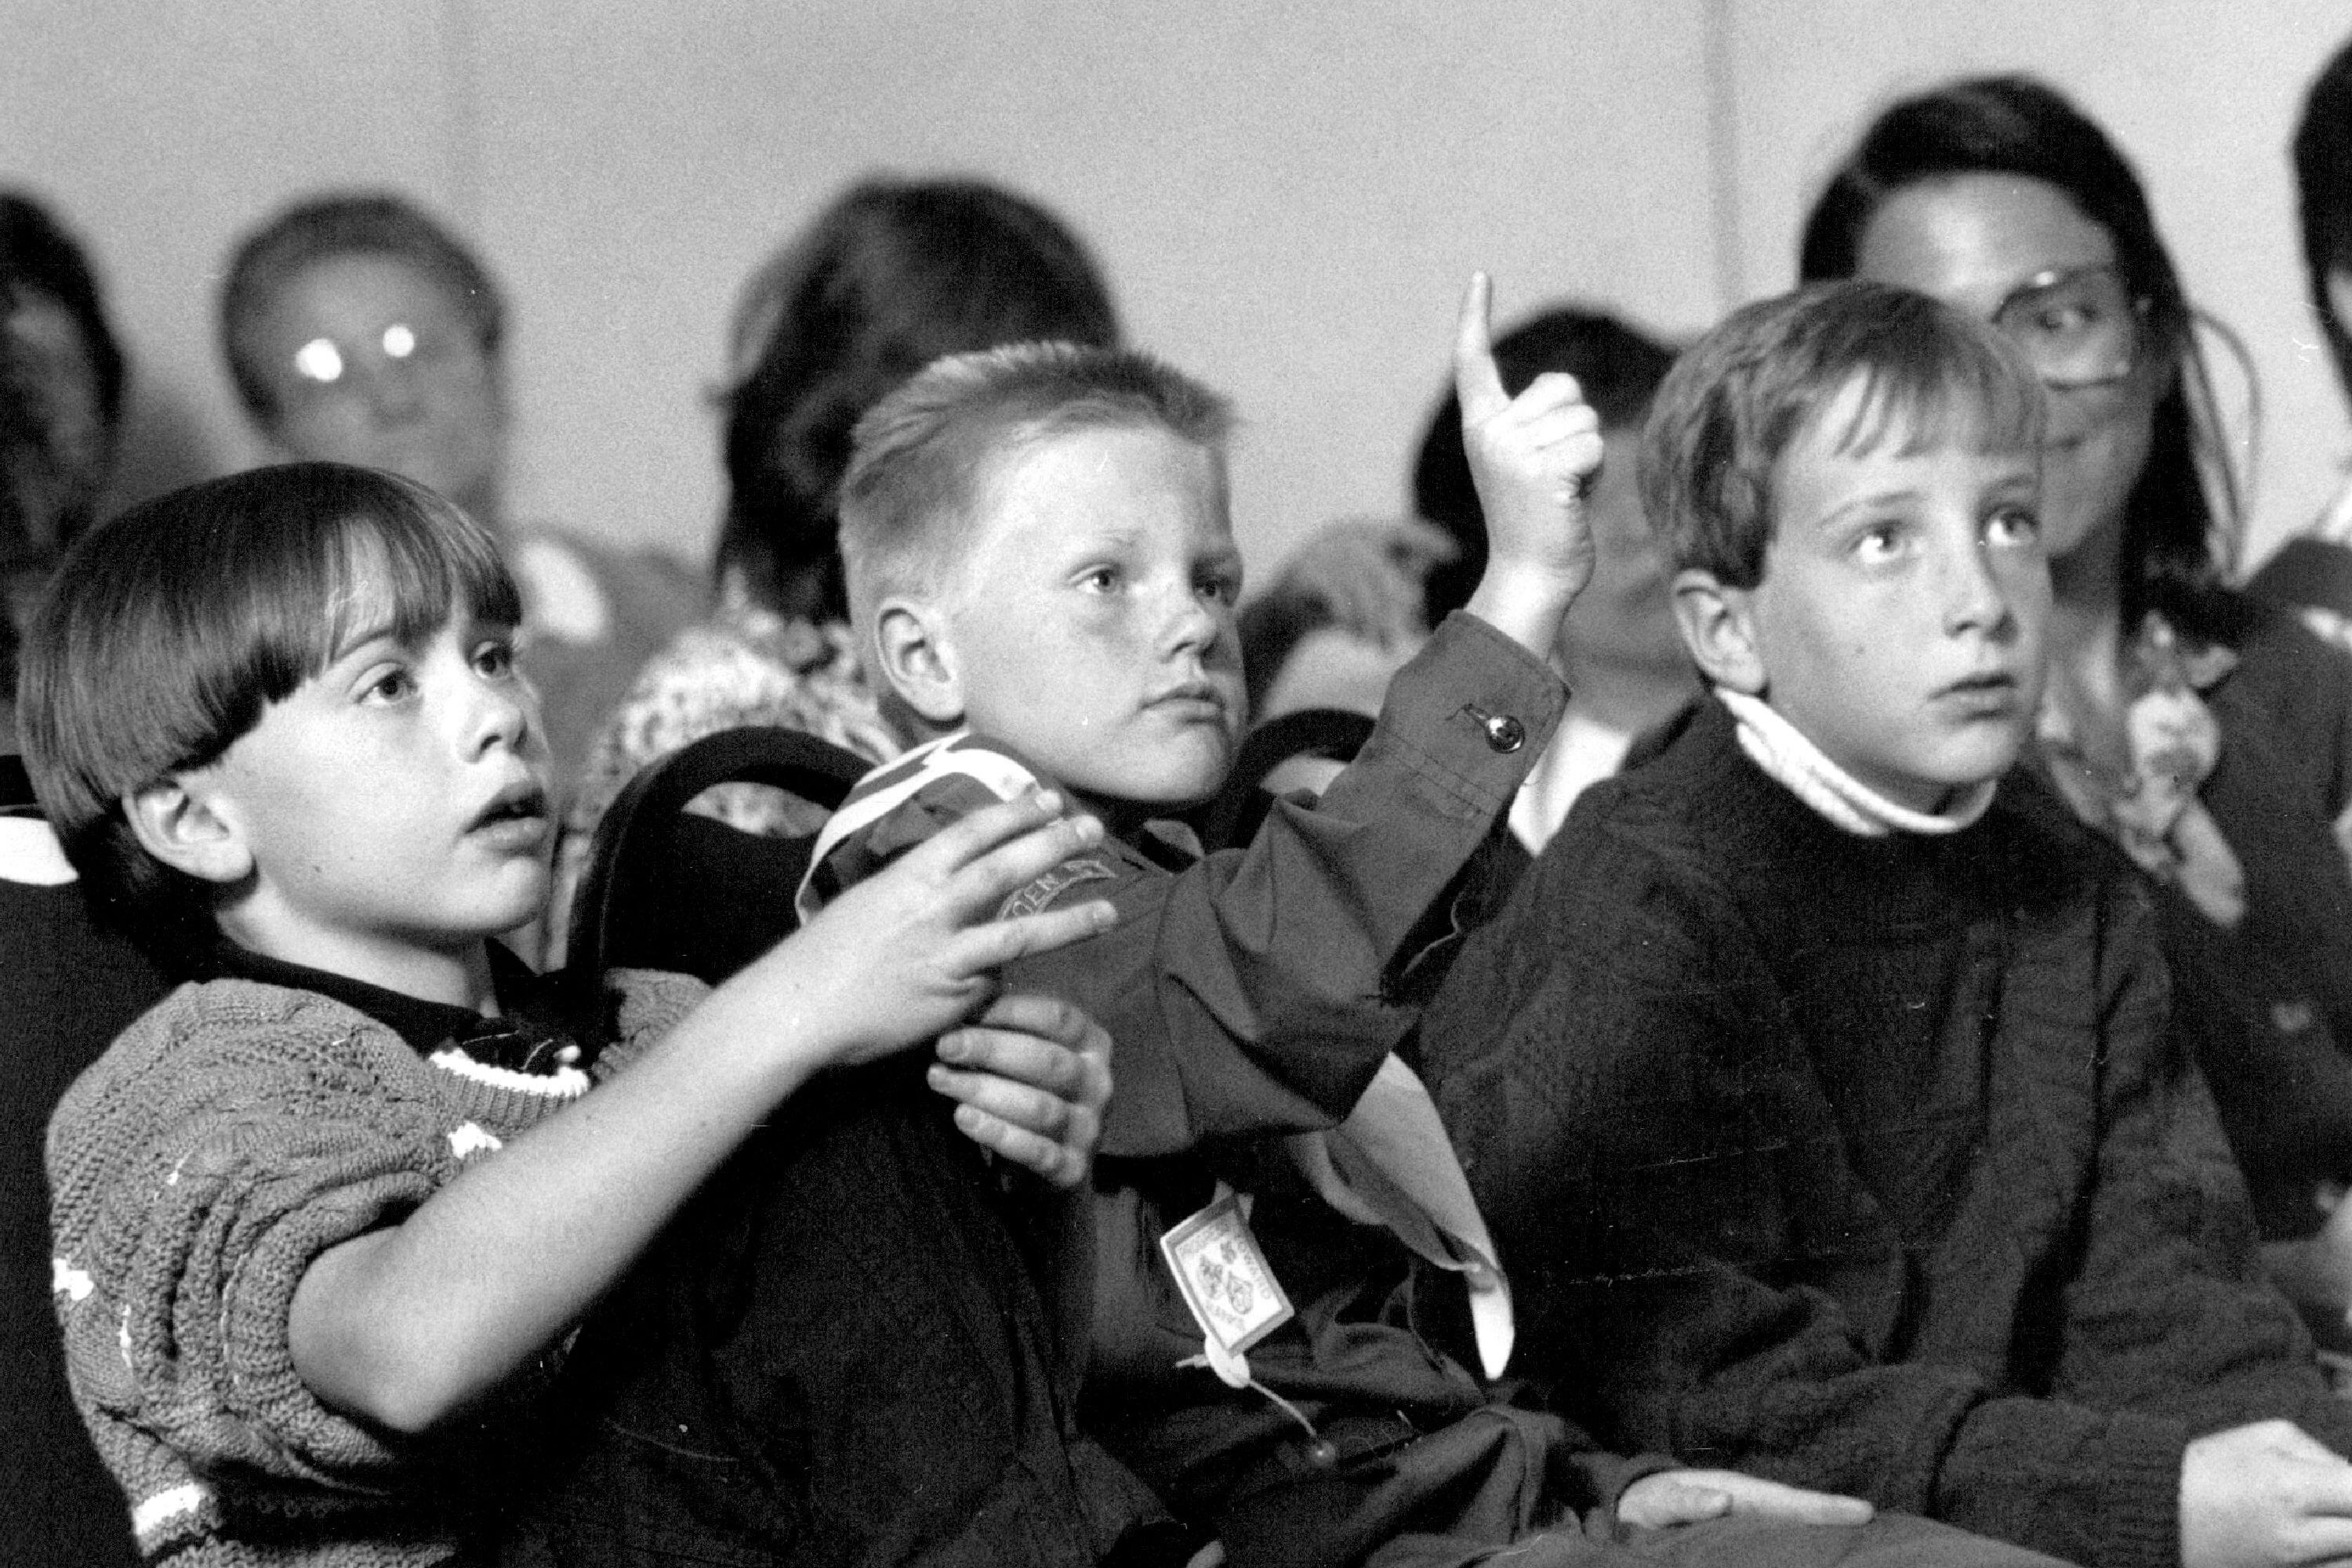 Three young students with short light hair sit in front of other students listening to someone speak.